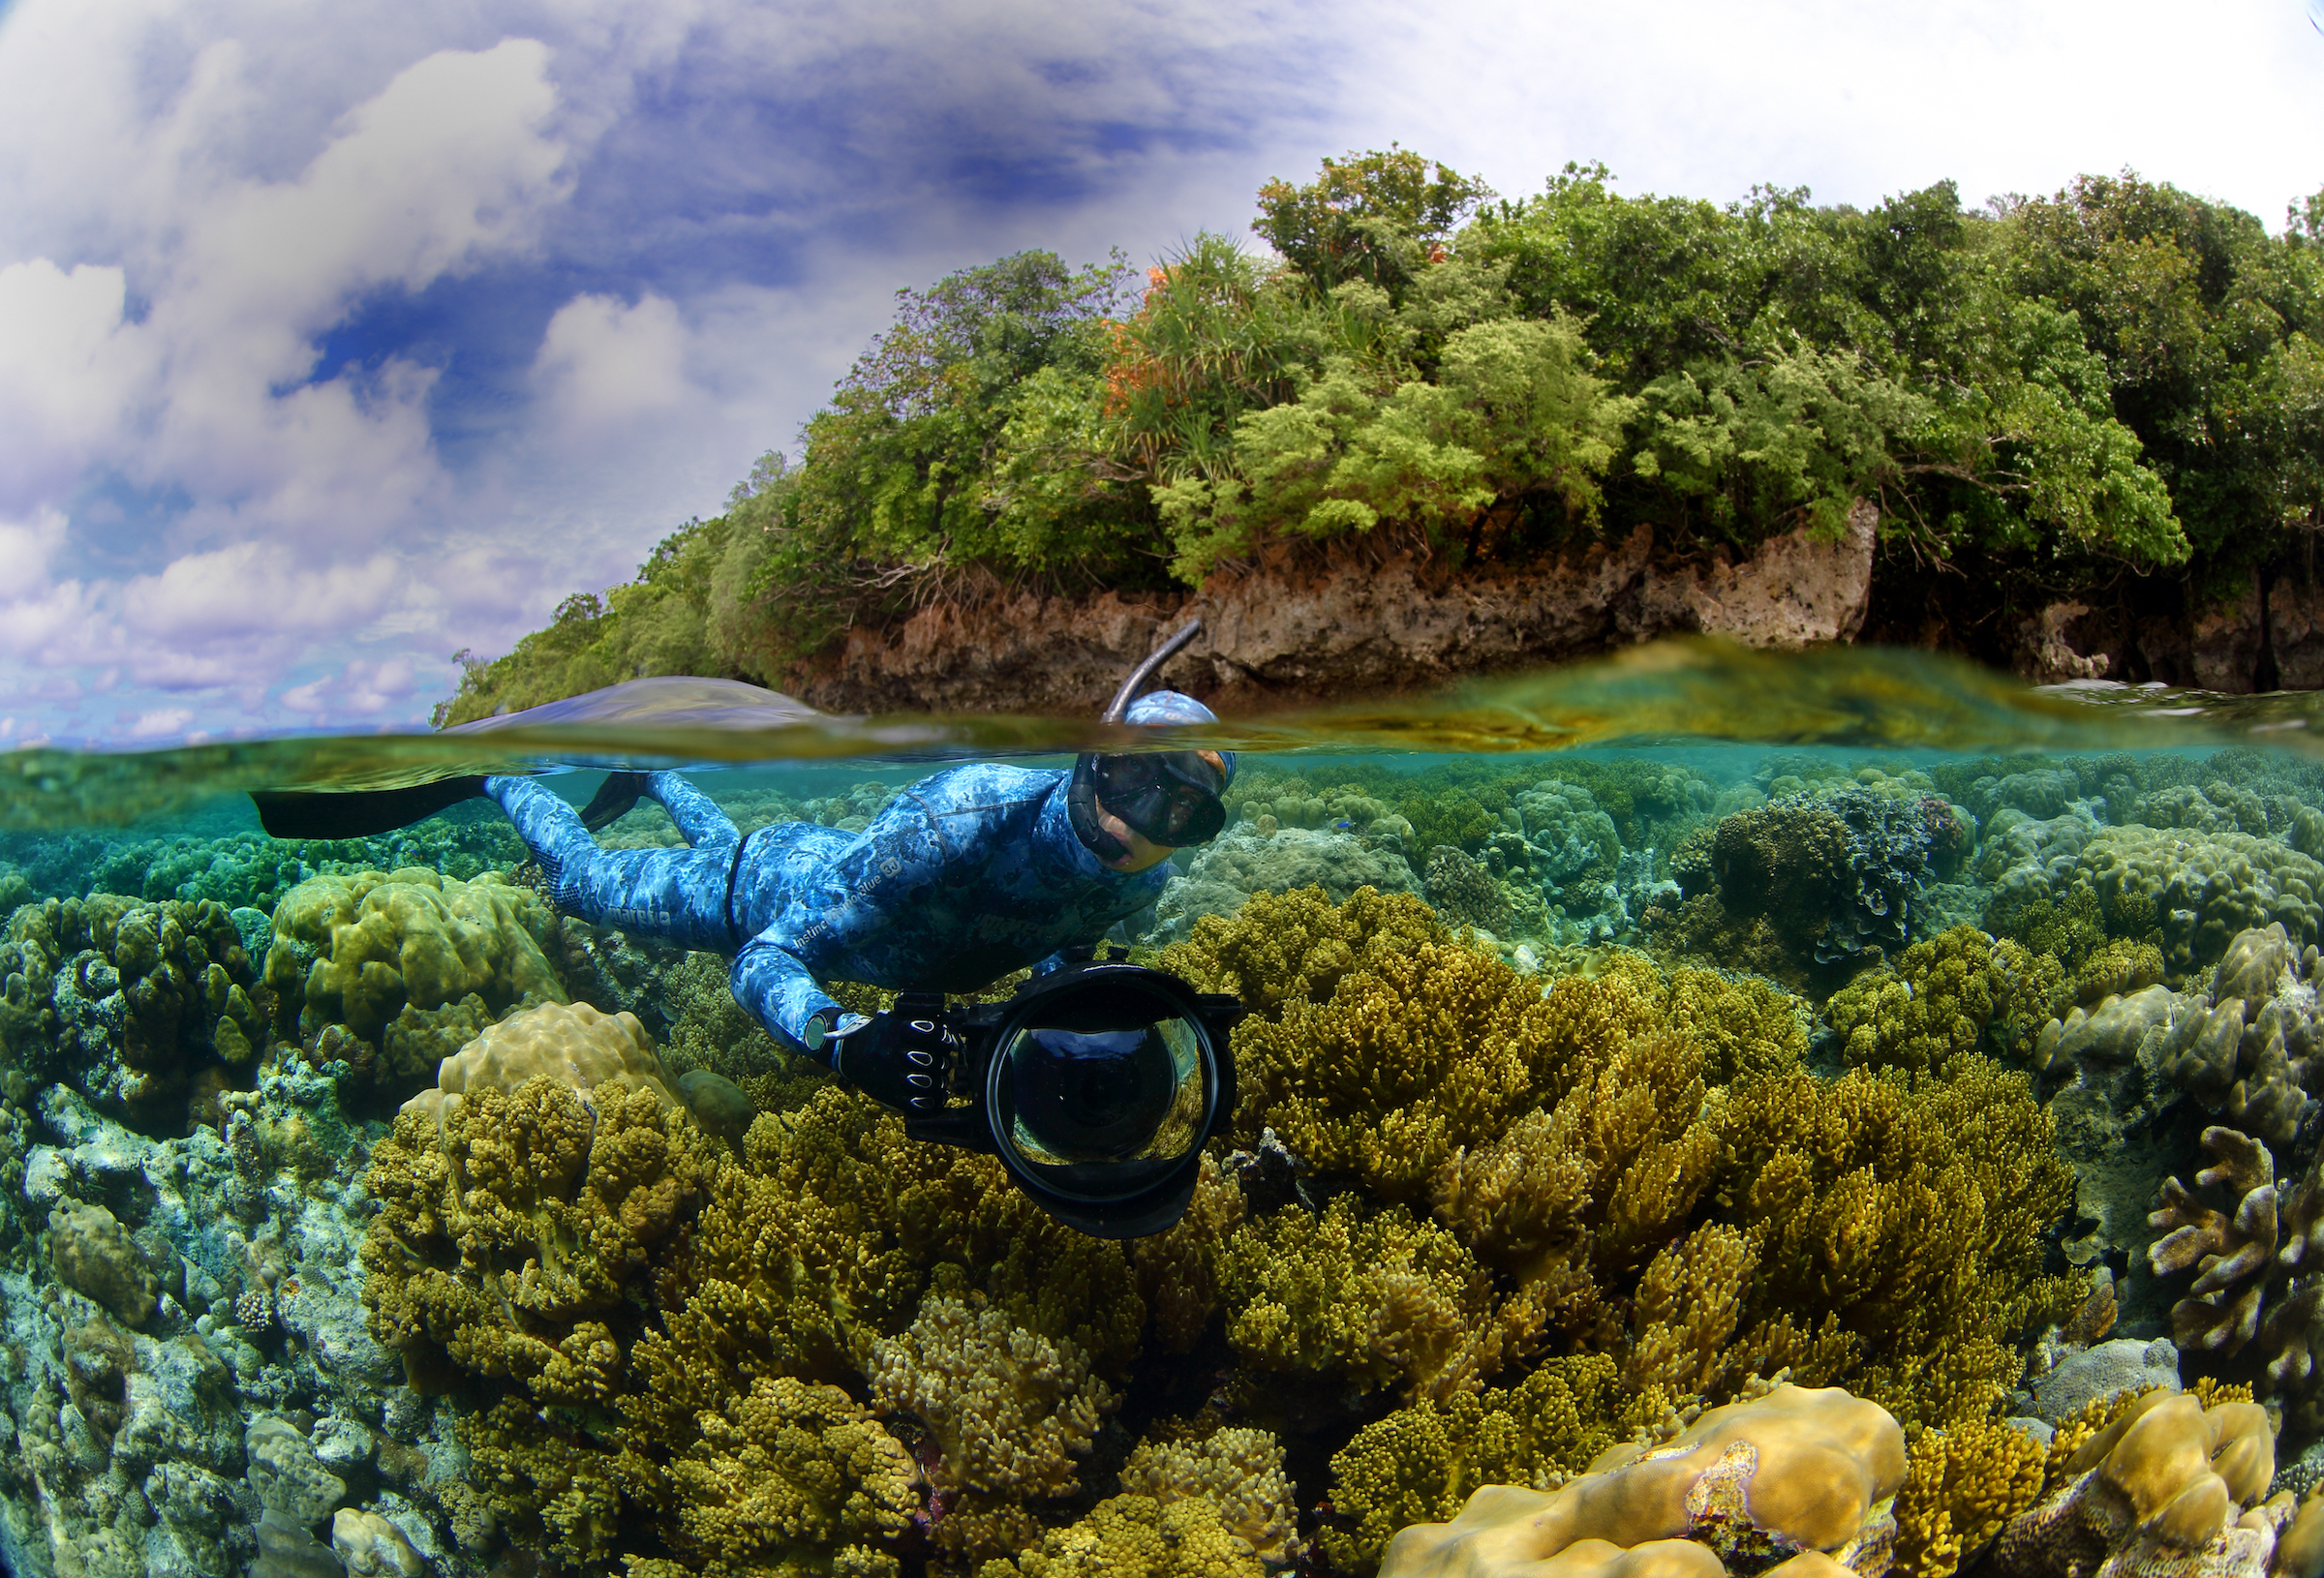 Enric Sala, NationalGeographic Explorer in Residence and Pristine Seas Founder, is seen exploring the reefs in Palau.